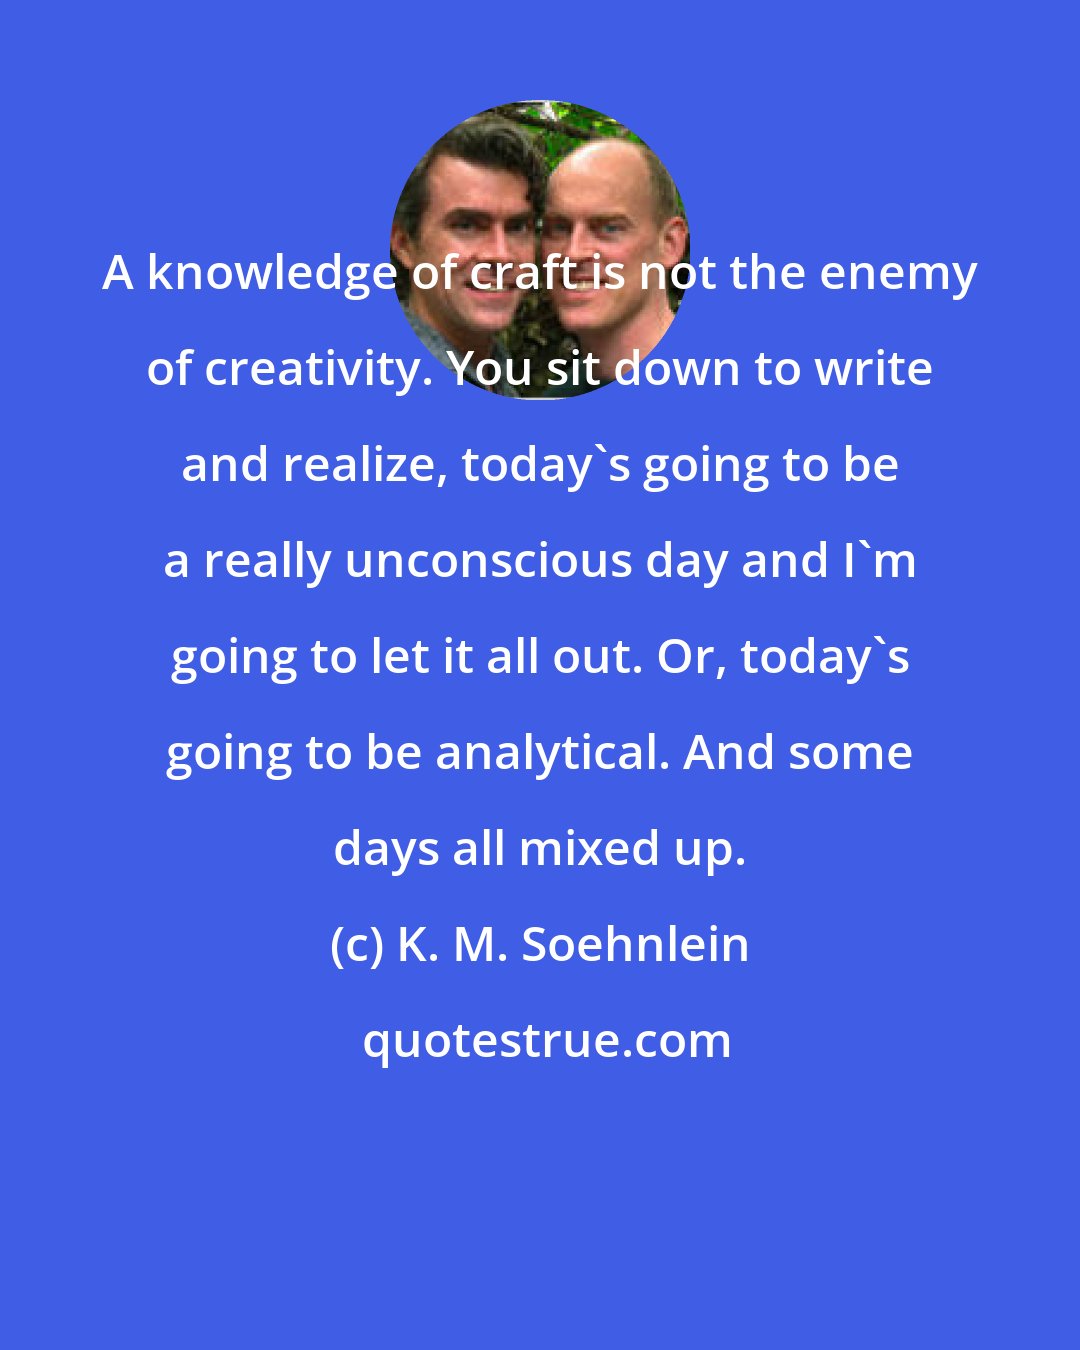 K. M. Soehnlein: A knowledge of craft is not the enemy of creativity. You sit down to write and realize, today's going to be a really unconscious day and I'm going to let it all out. Or, today's going to be analytical. And some days all mixed up.